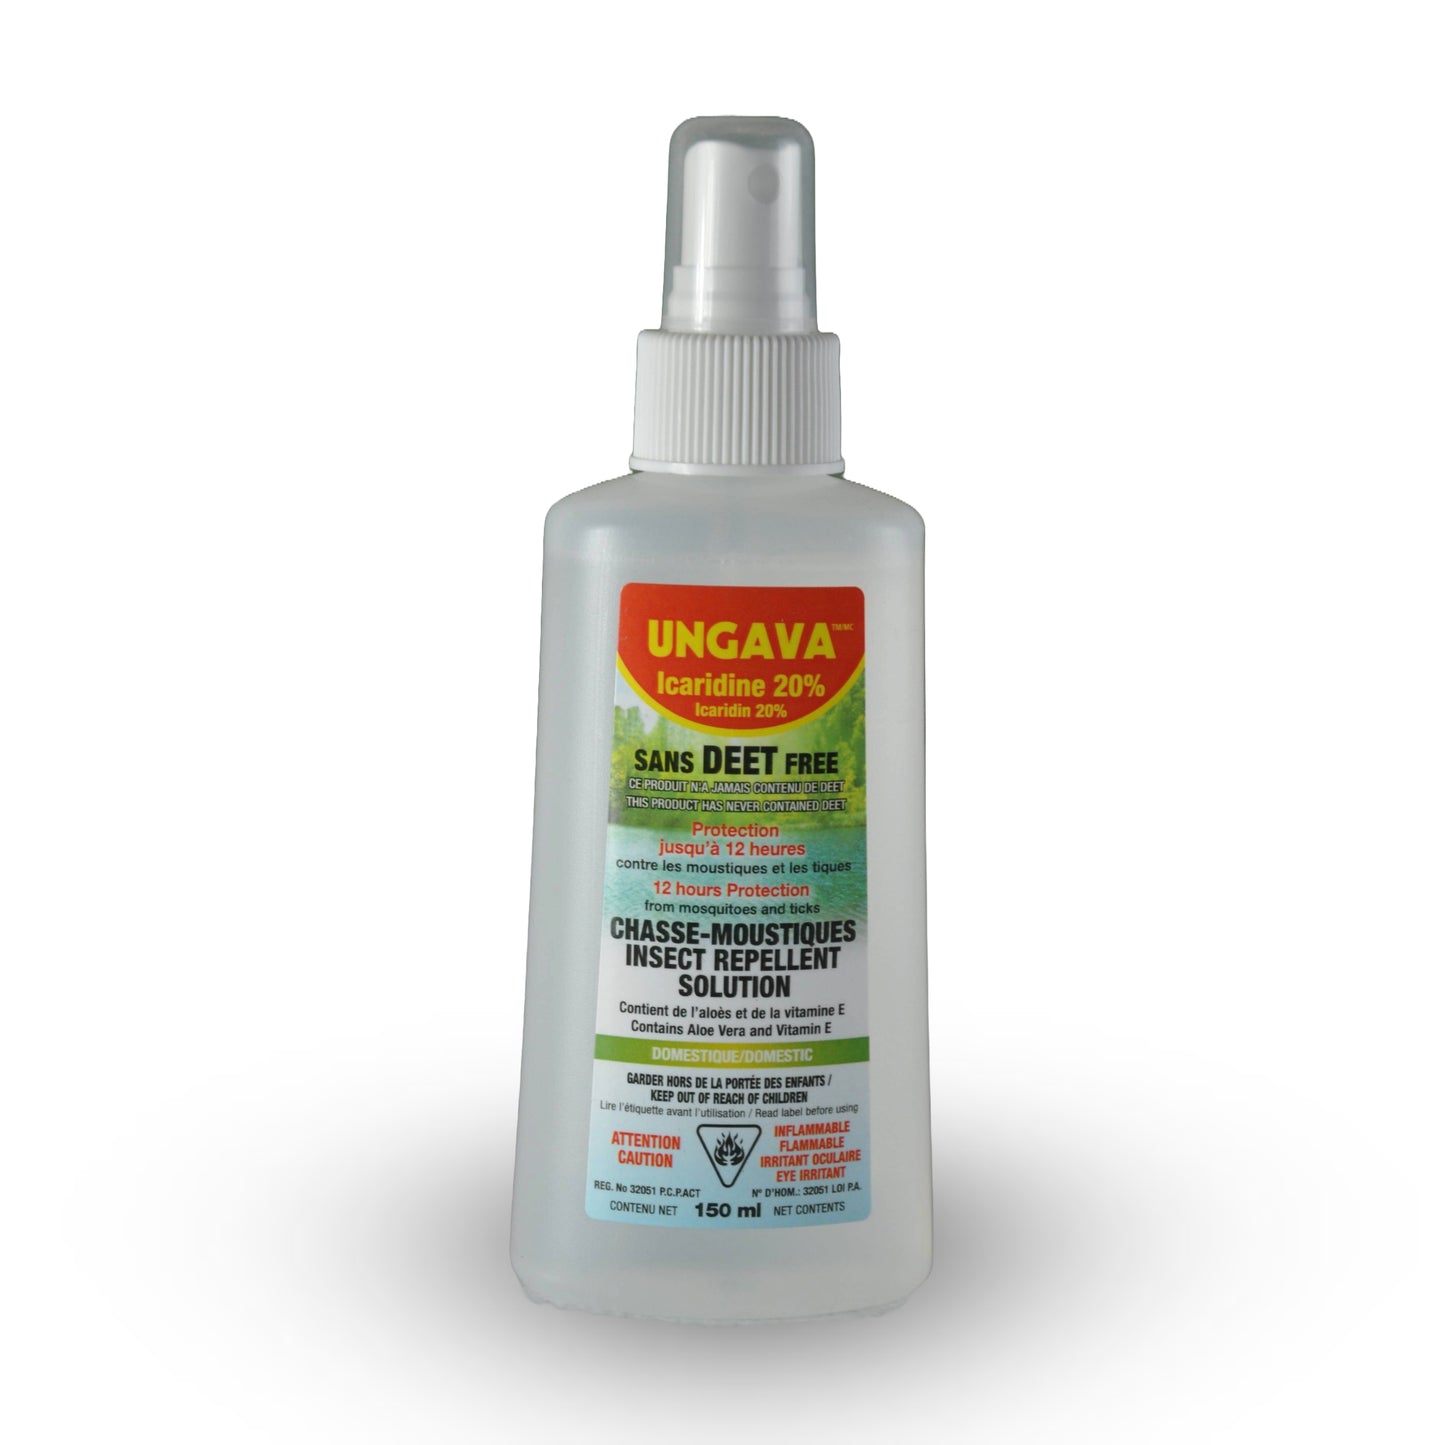 Natural Barrier and Repellent Against Mosquitoes